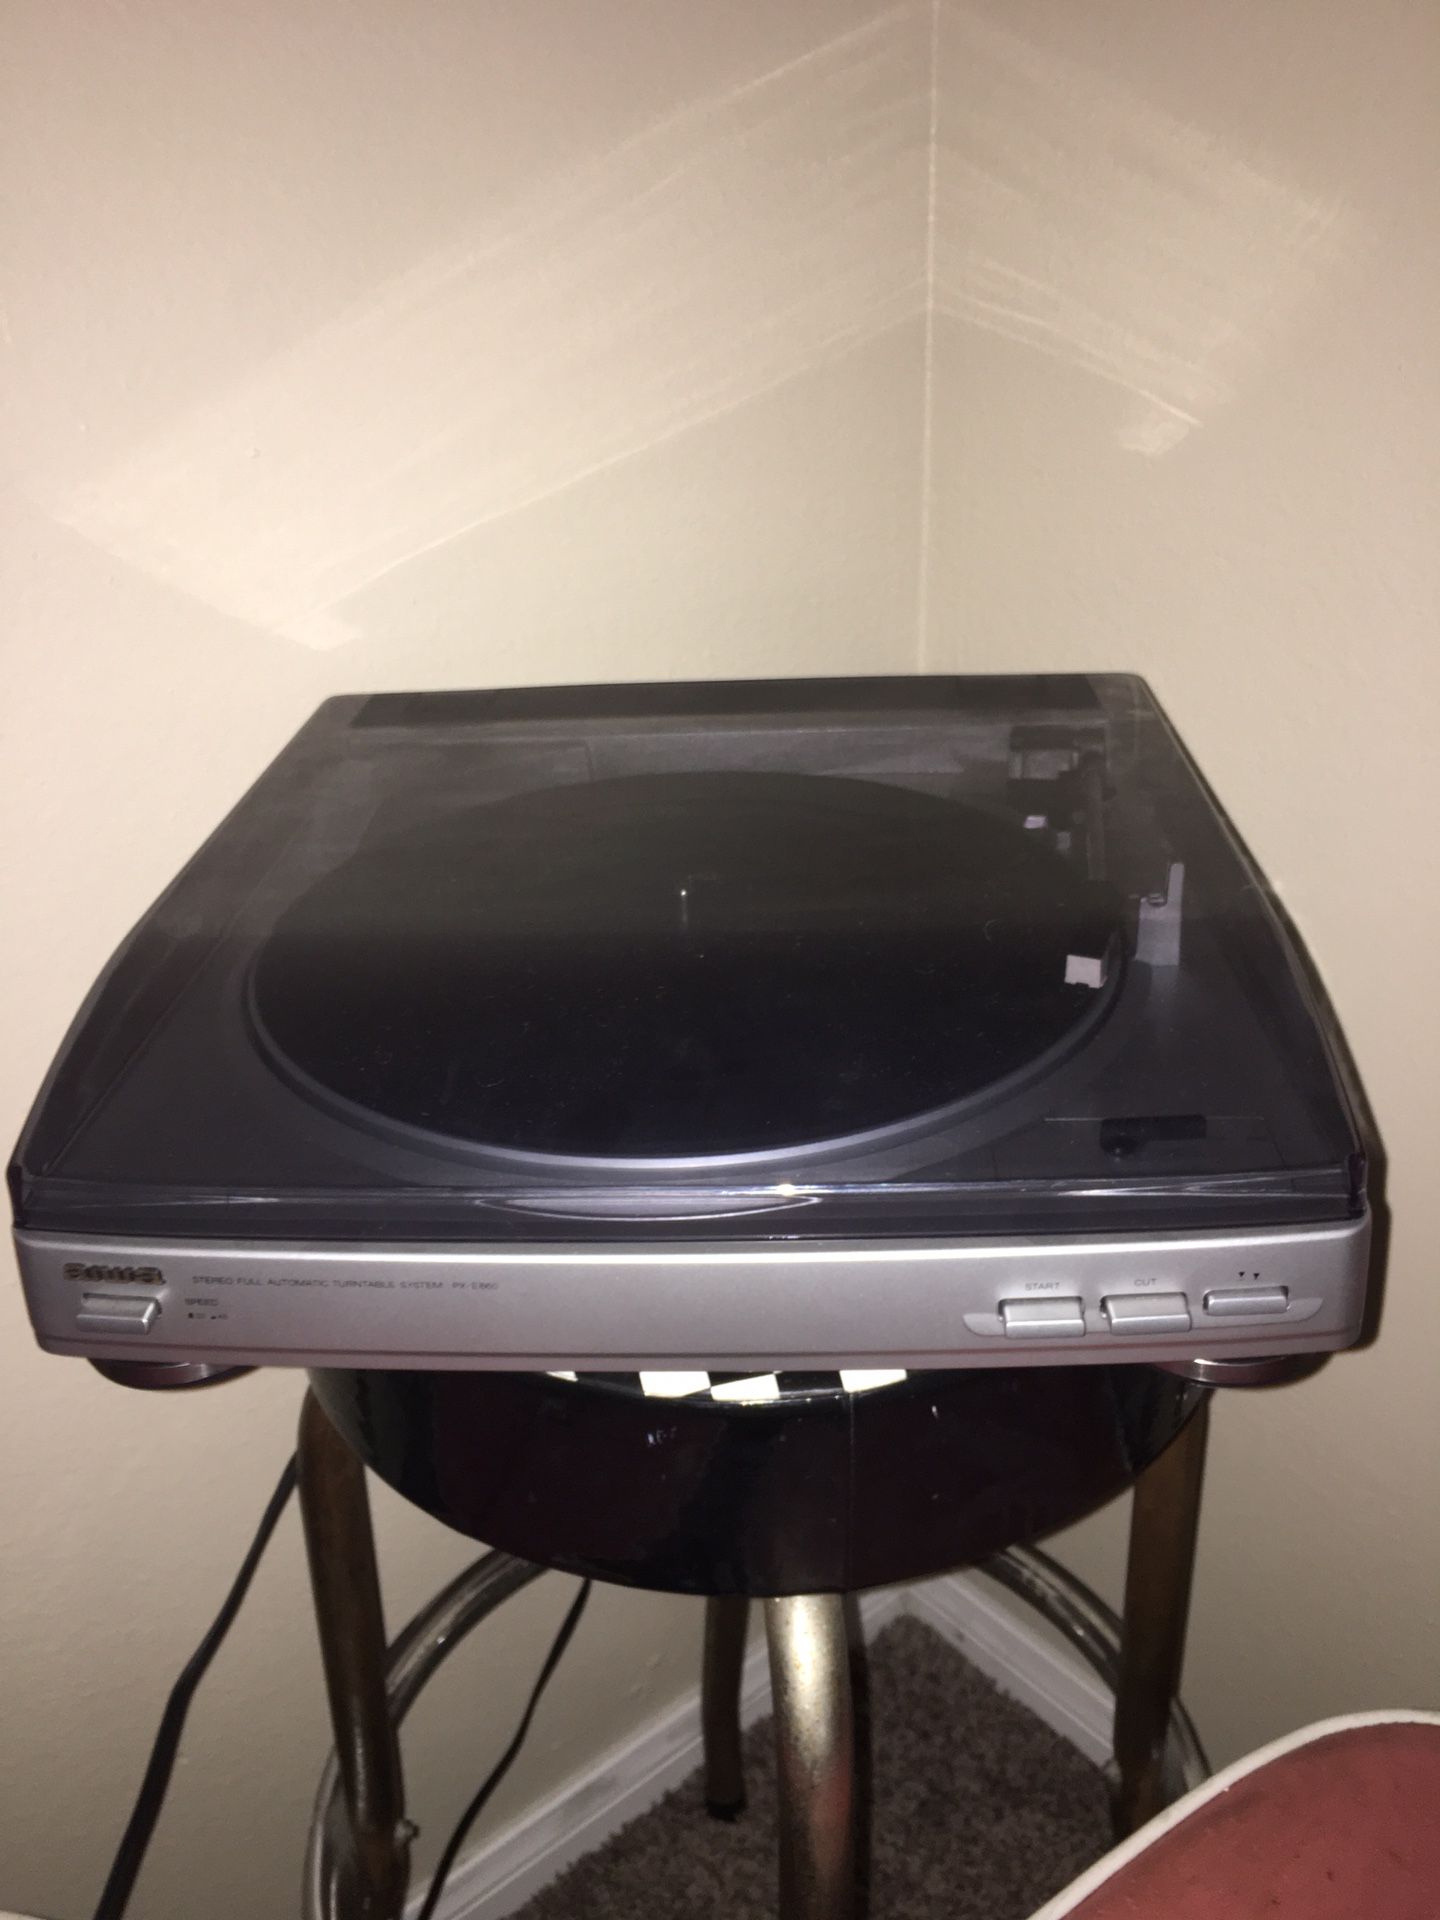 Stereo Turntable system